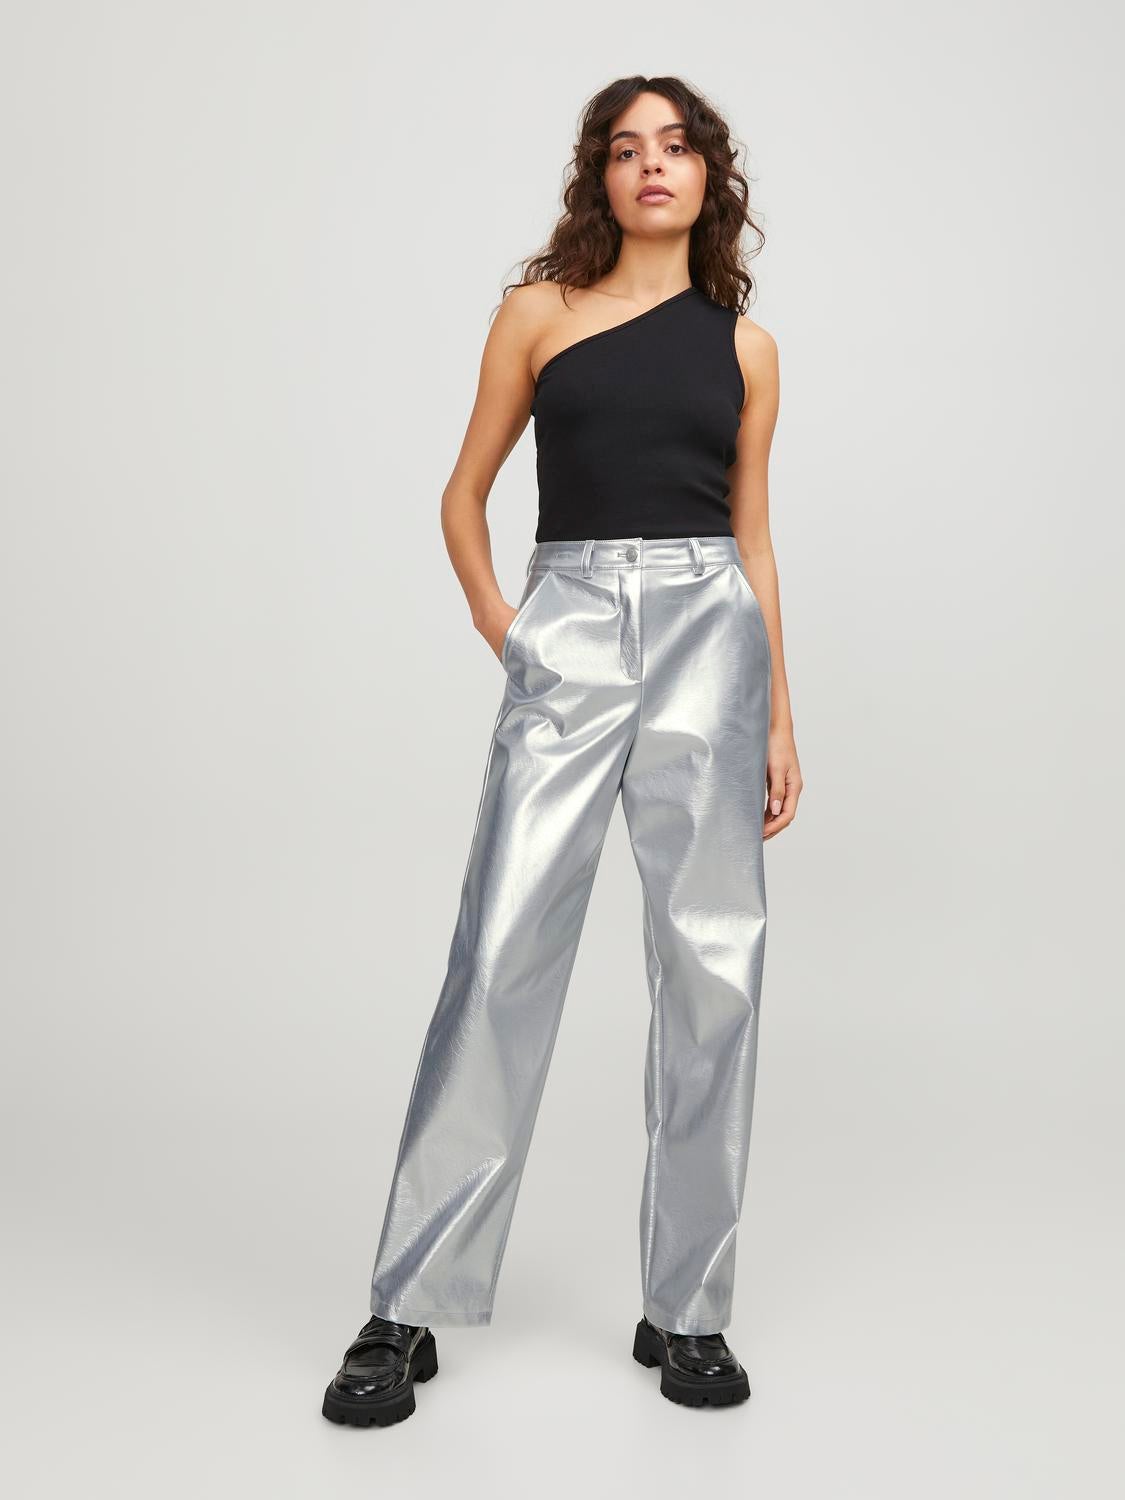 JXMARY Faux leather trousers